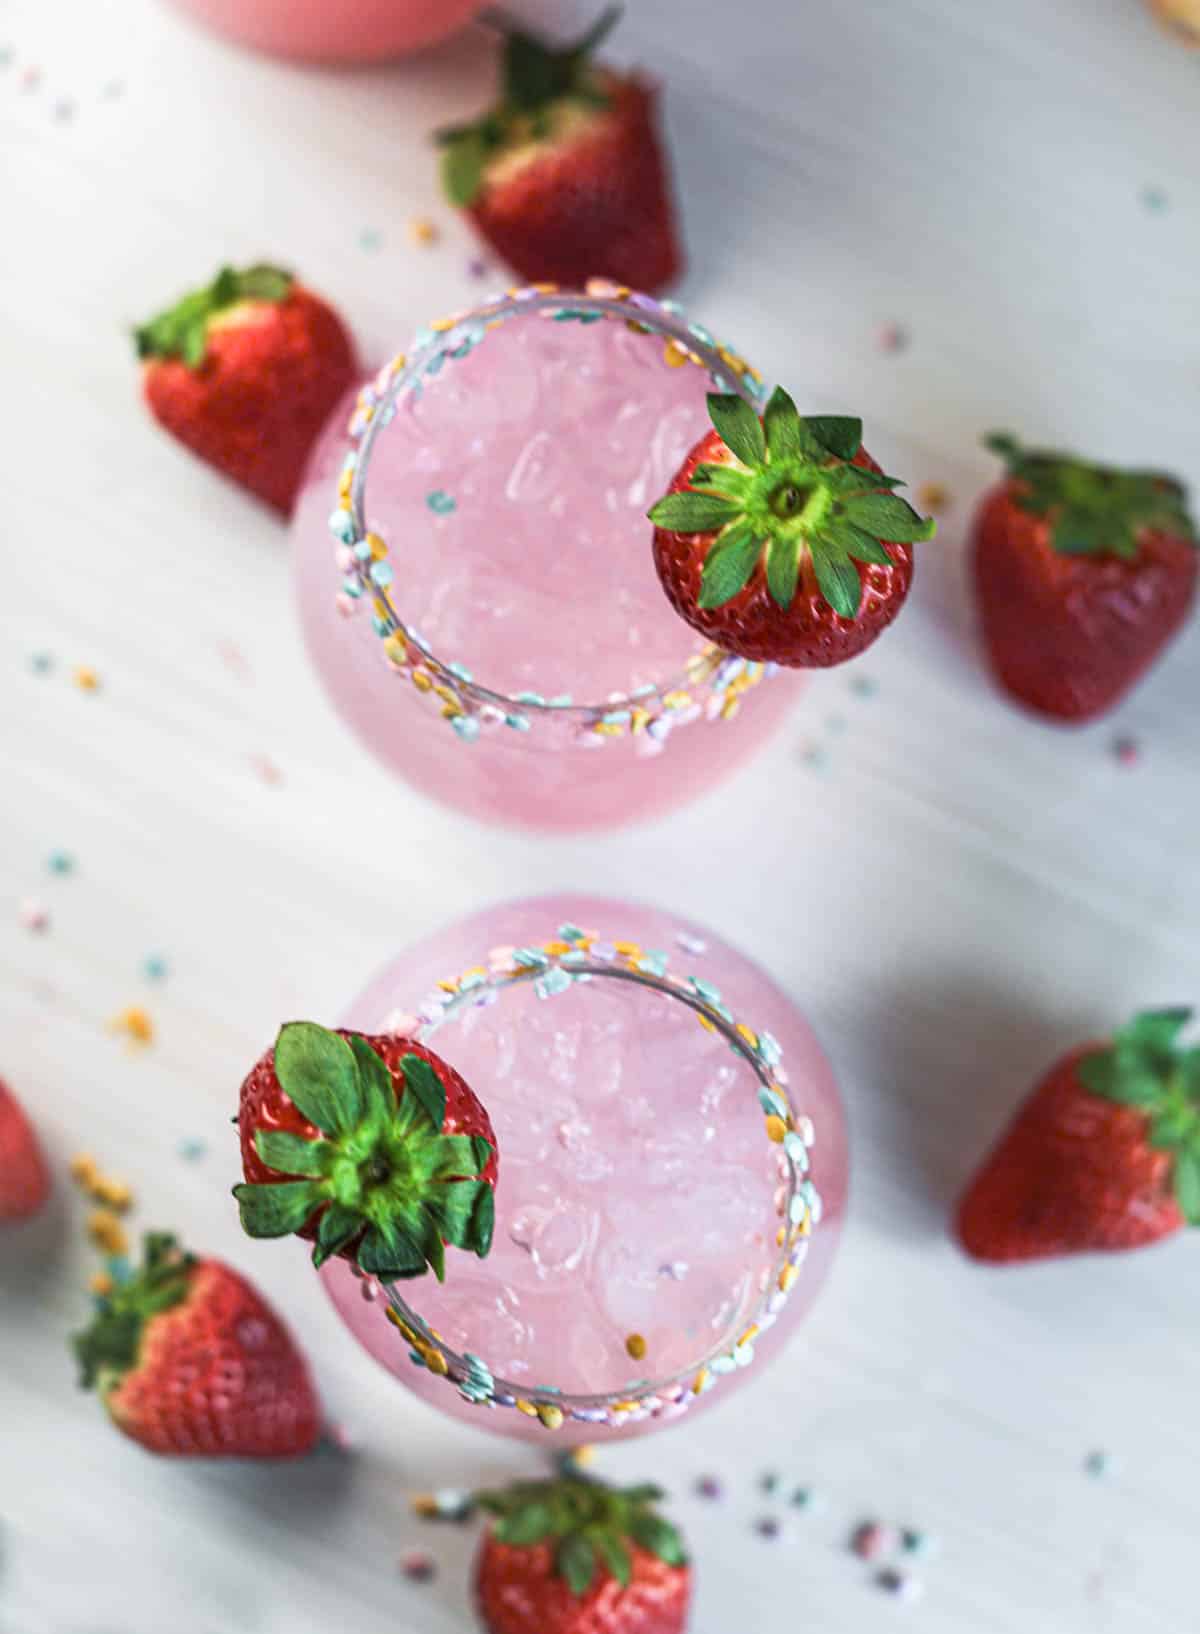 Pink cocktails from above with sprinkles on rim with strawberries and sprinkles on table.